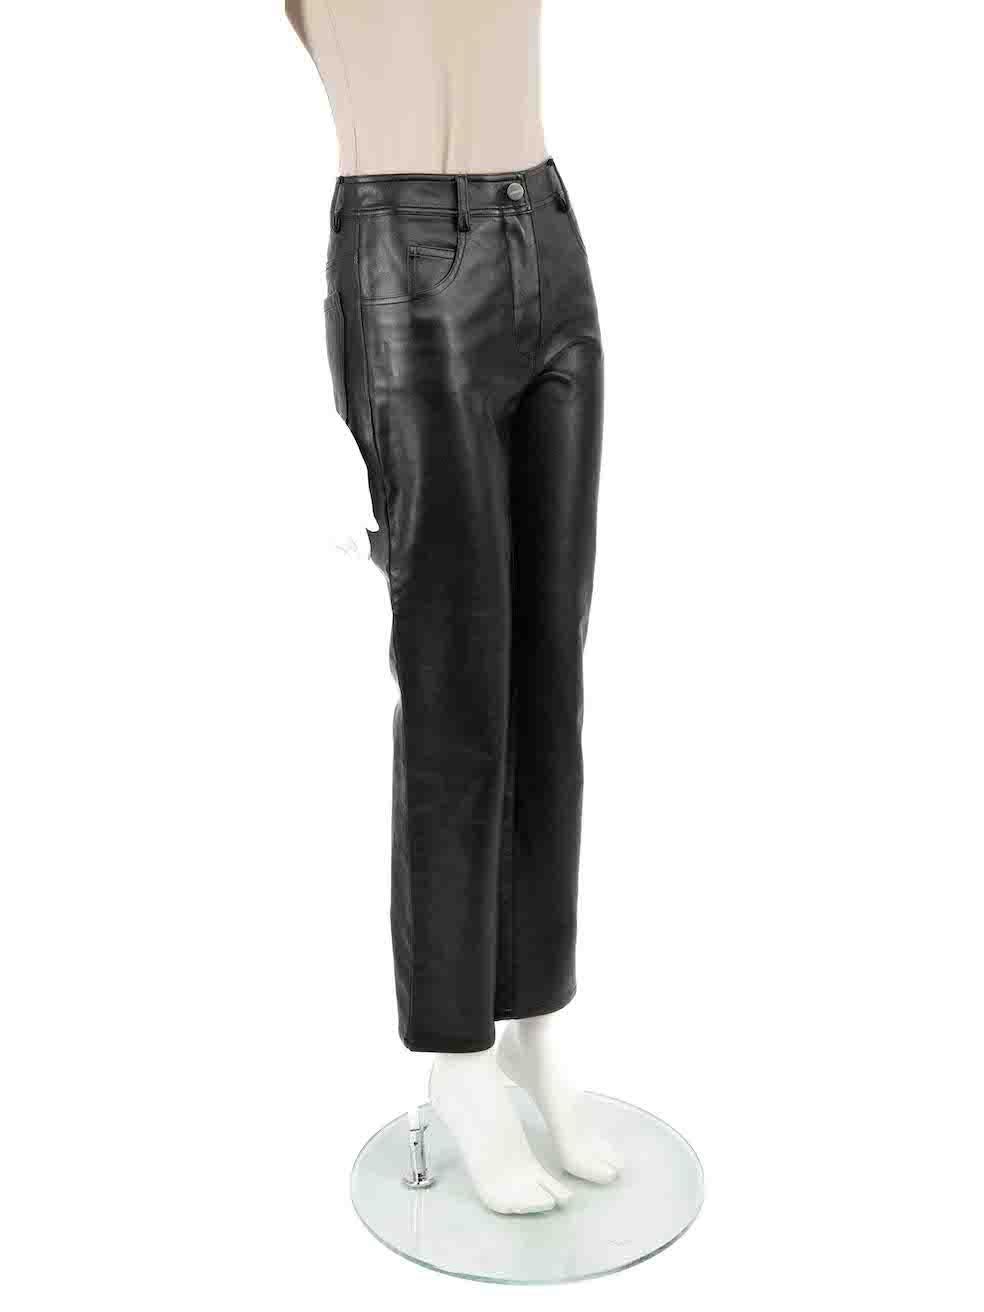 CONDITION is Very good. Hardly any visible wear to trousers is evident on this used Miaou designer resale item.
 
 
 
 Details
 
 
 Black
 
 Vegan leather
 
 Trousers
 
 Straight leg
 
 High rise
 
 3x Front pockets
 
 2x Back pockets
 
 Fly zip and